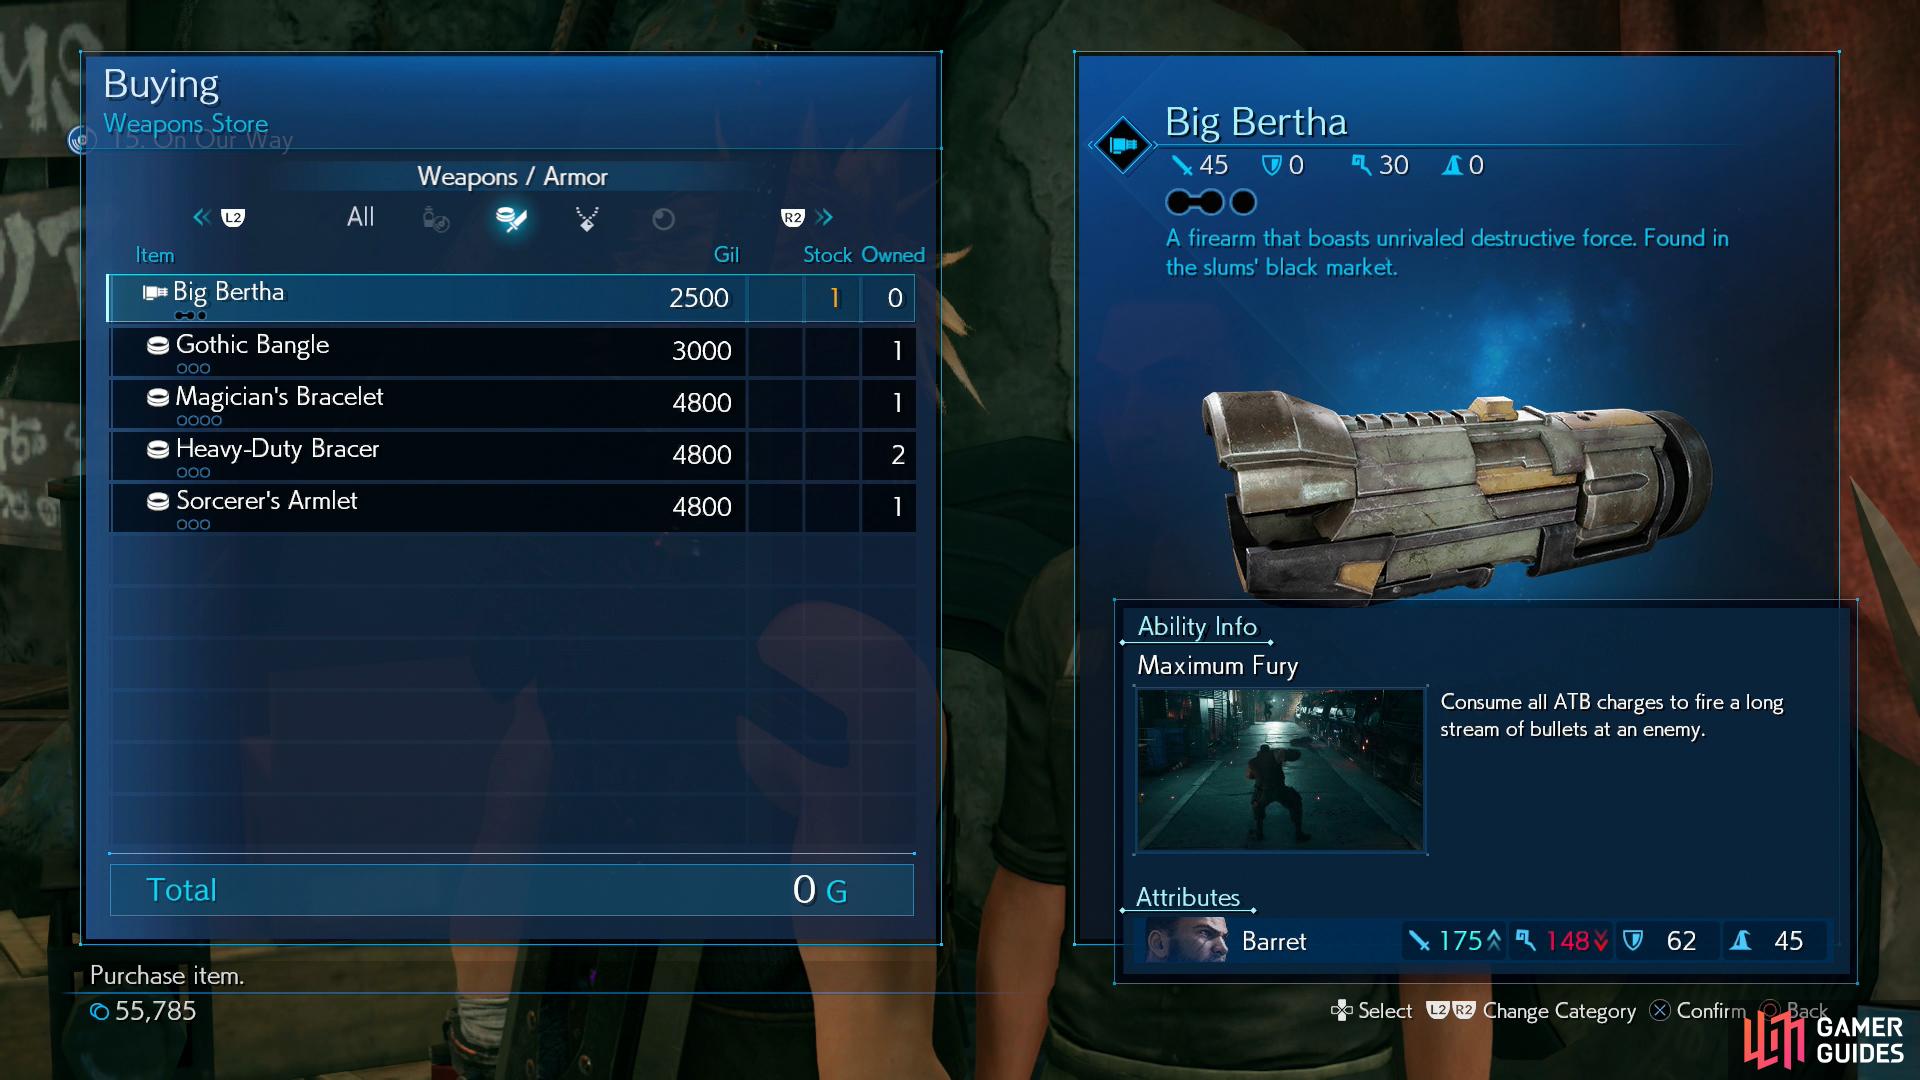 and the Big Bertha weapon for Barret.